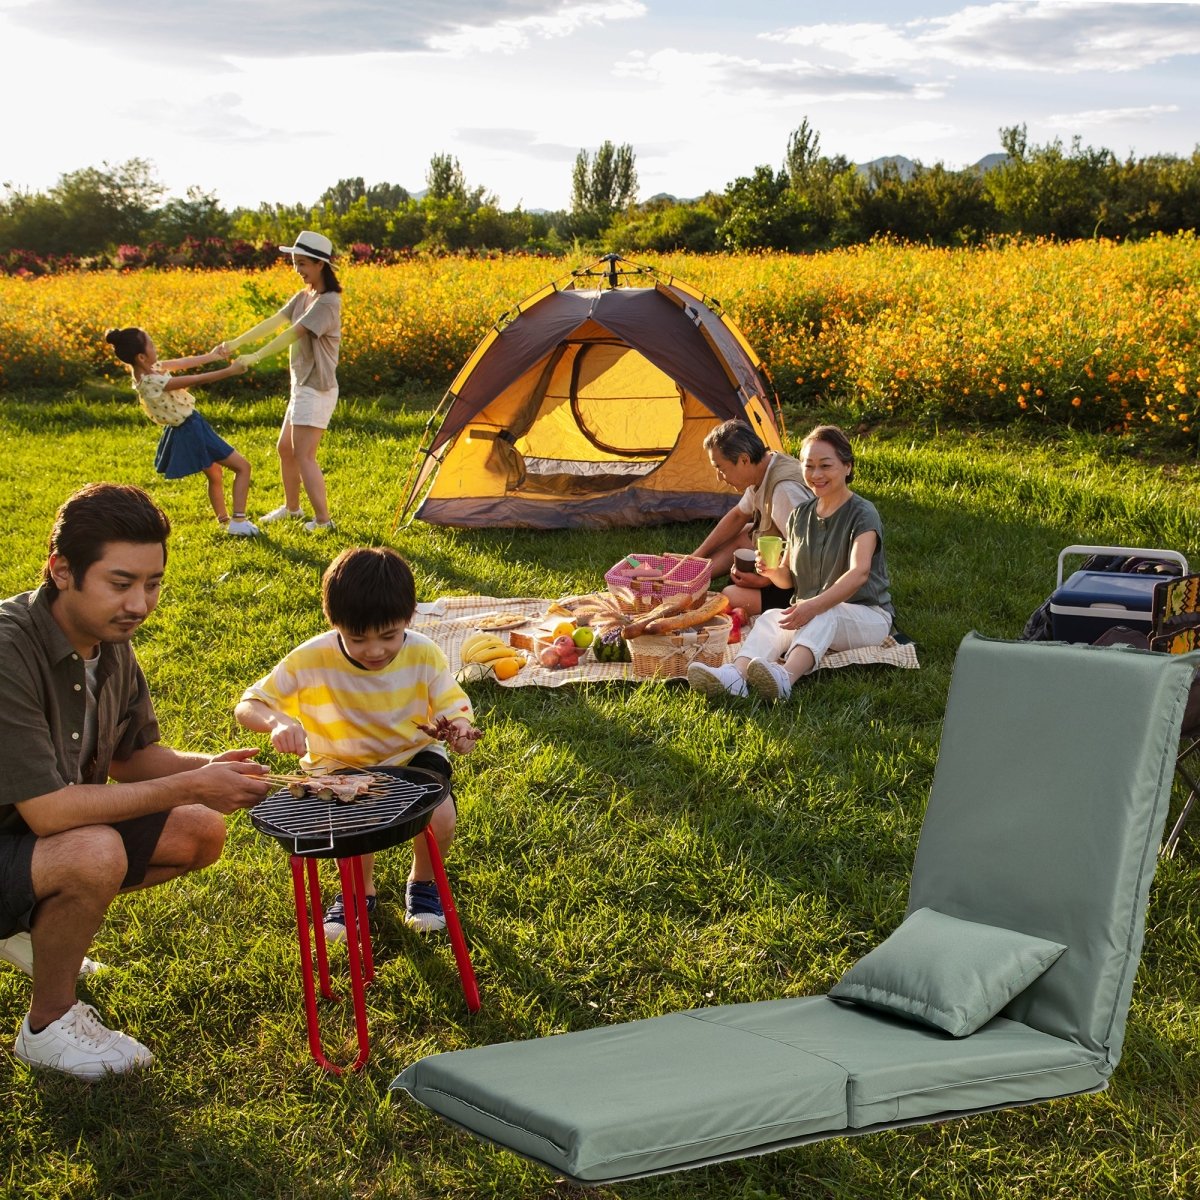 Foldable Outdoor Travel Camping Reclining Chair